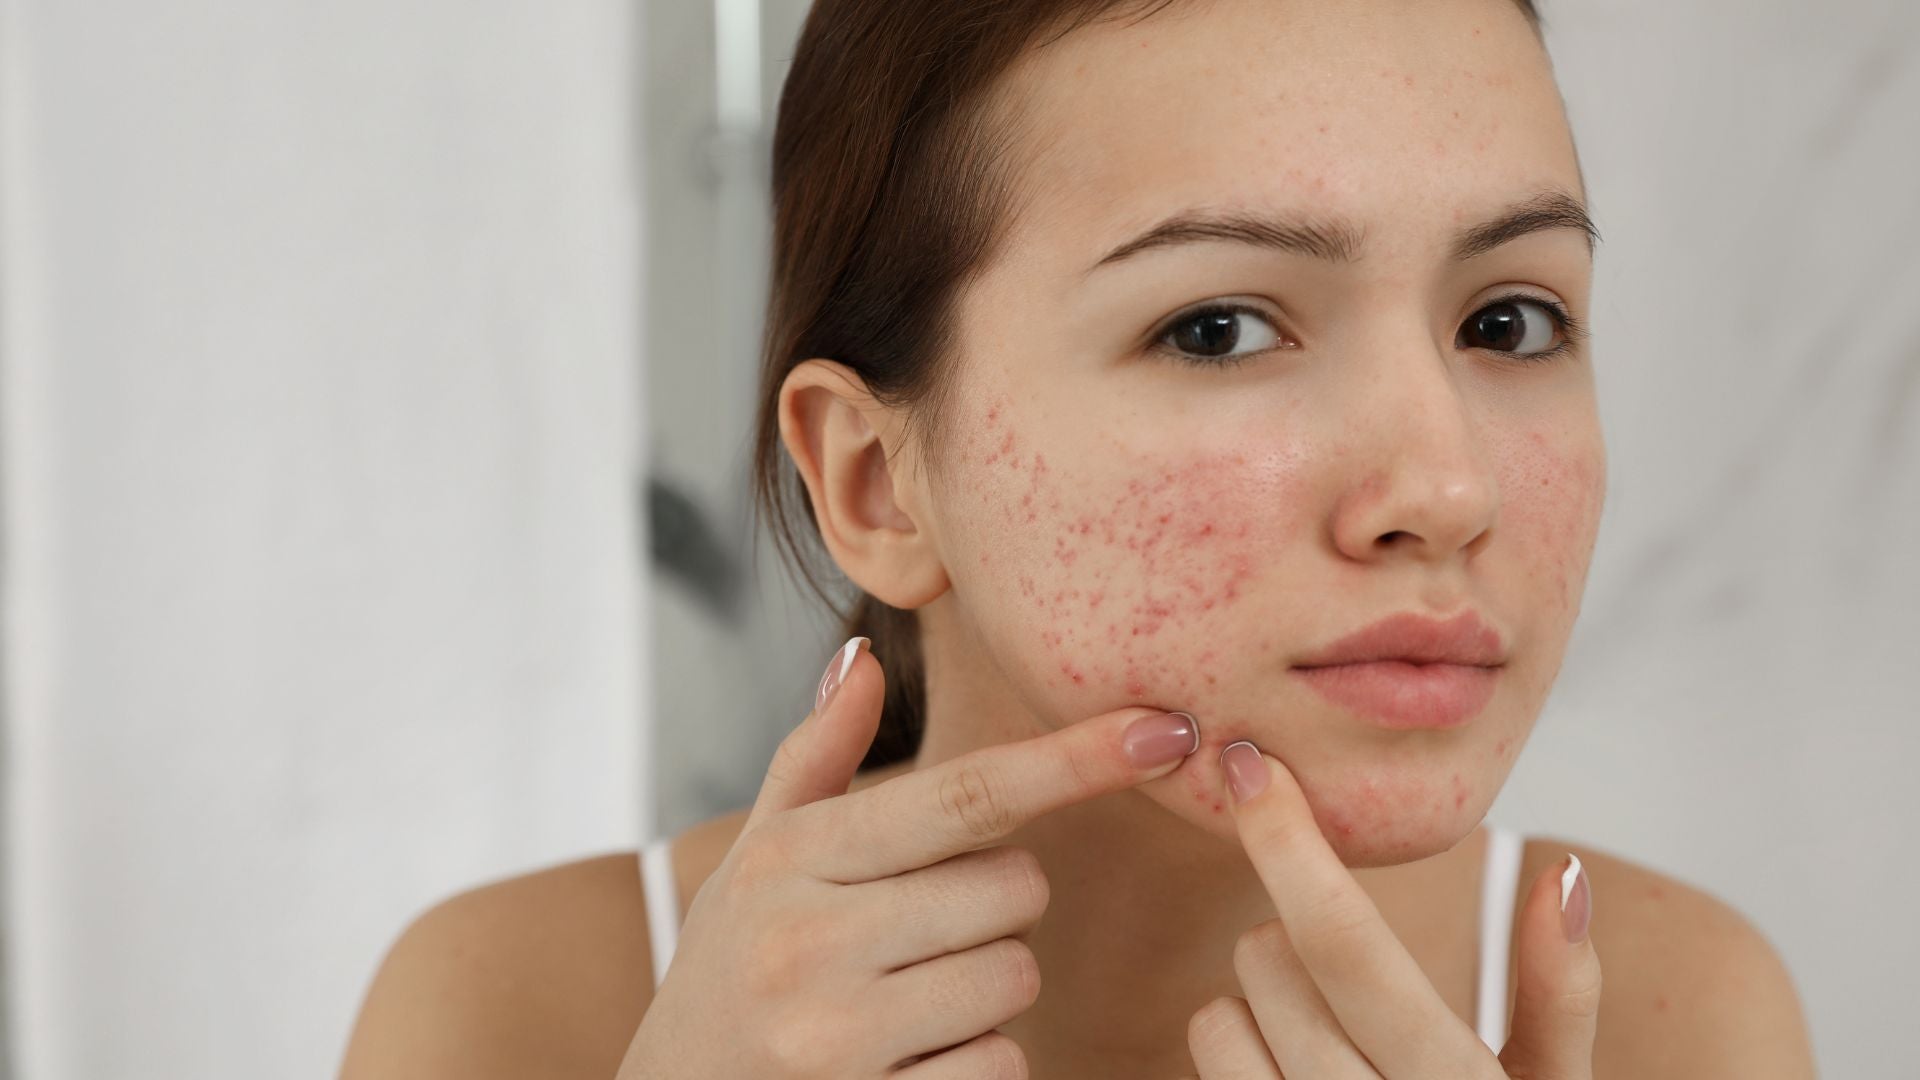 The Acne Pillowcase Predicament: Are You Sleeping on a Skin Nightmare?